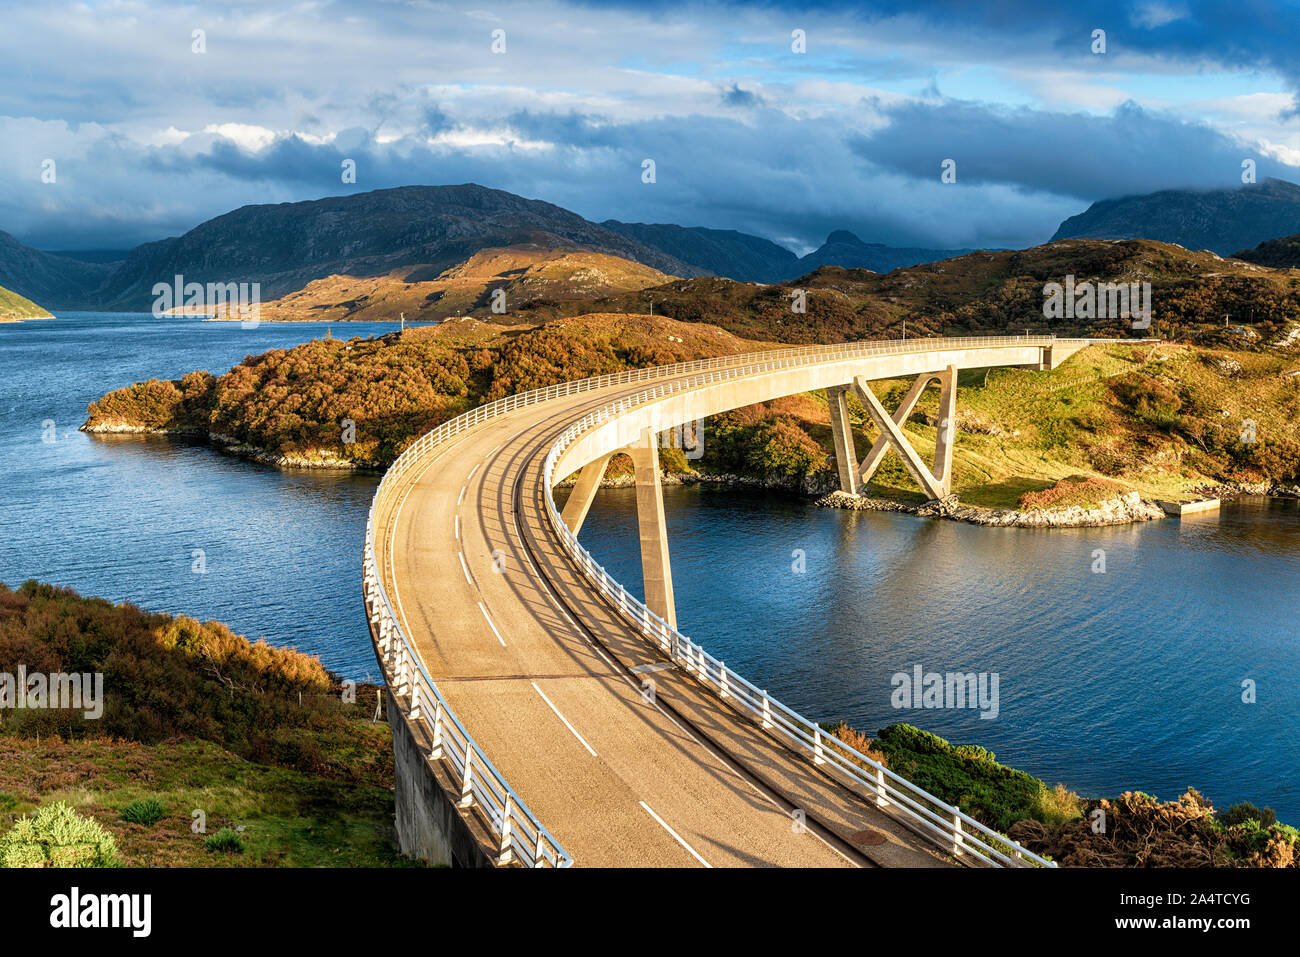 The curved Kylesku Bridge which crosses Loch a' Chàirn Bhàin in the Highlands of Scotland and forms part of the North Coast 500 scenic driving route Stock Photo